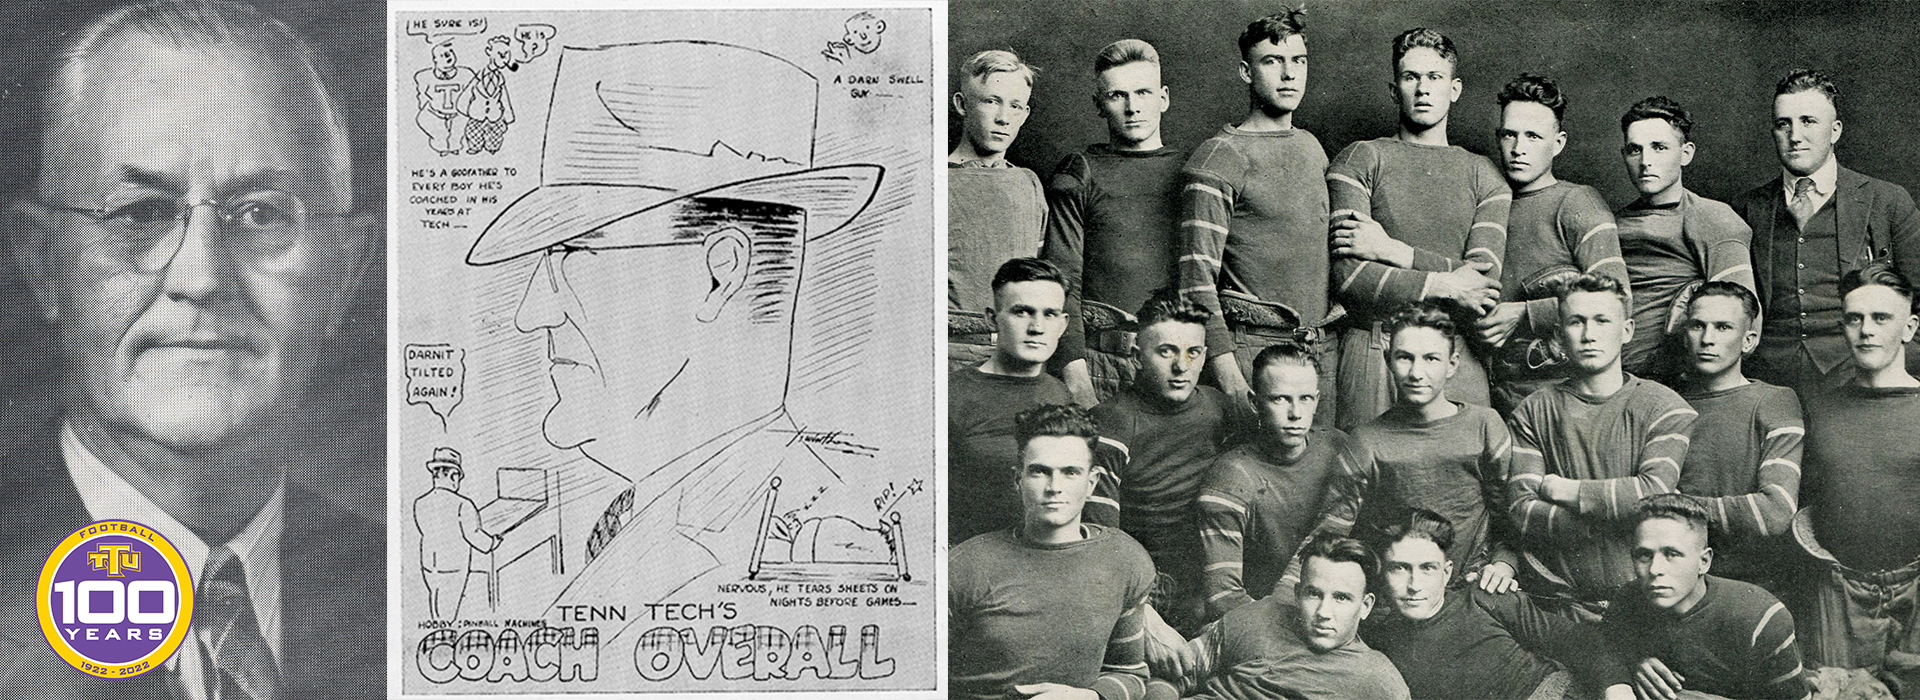 Tech Football | 100th Anniversary: Early years mark search for identity (1921-1929)